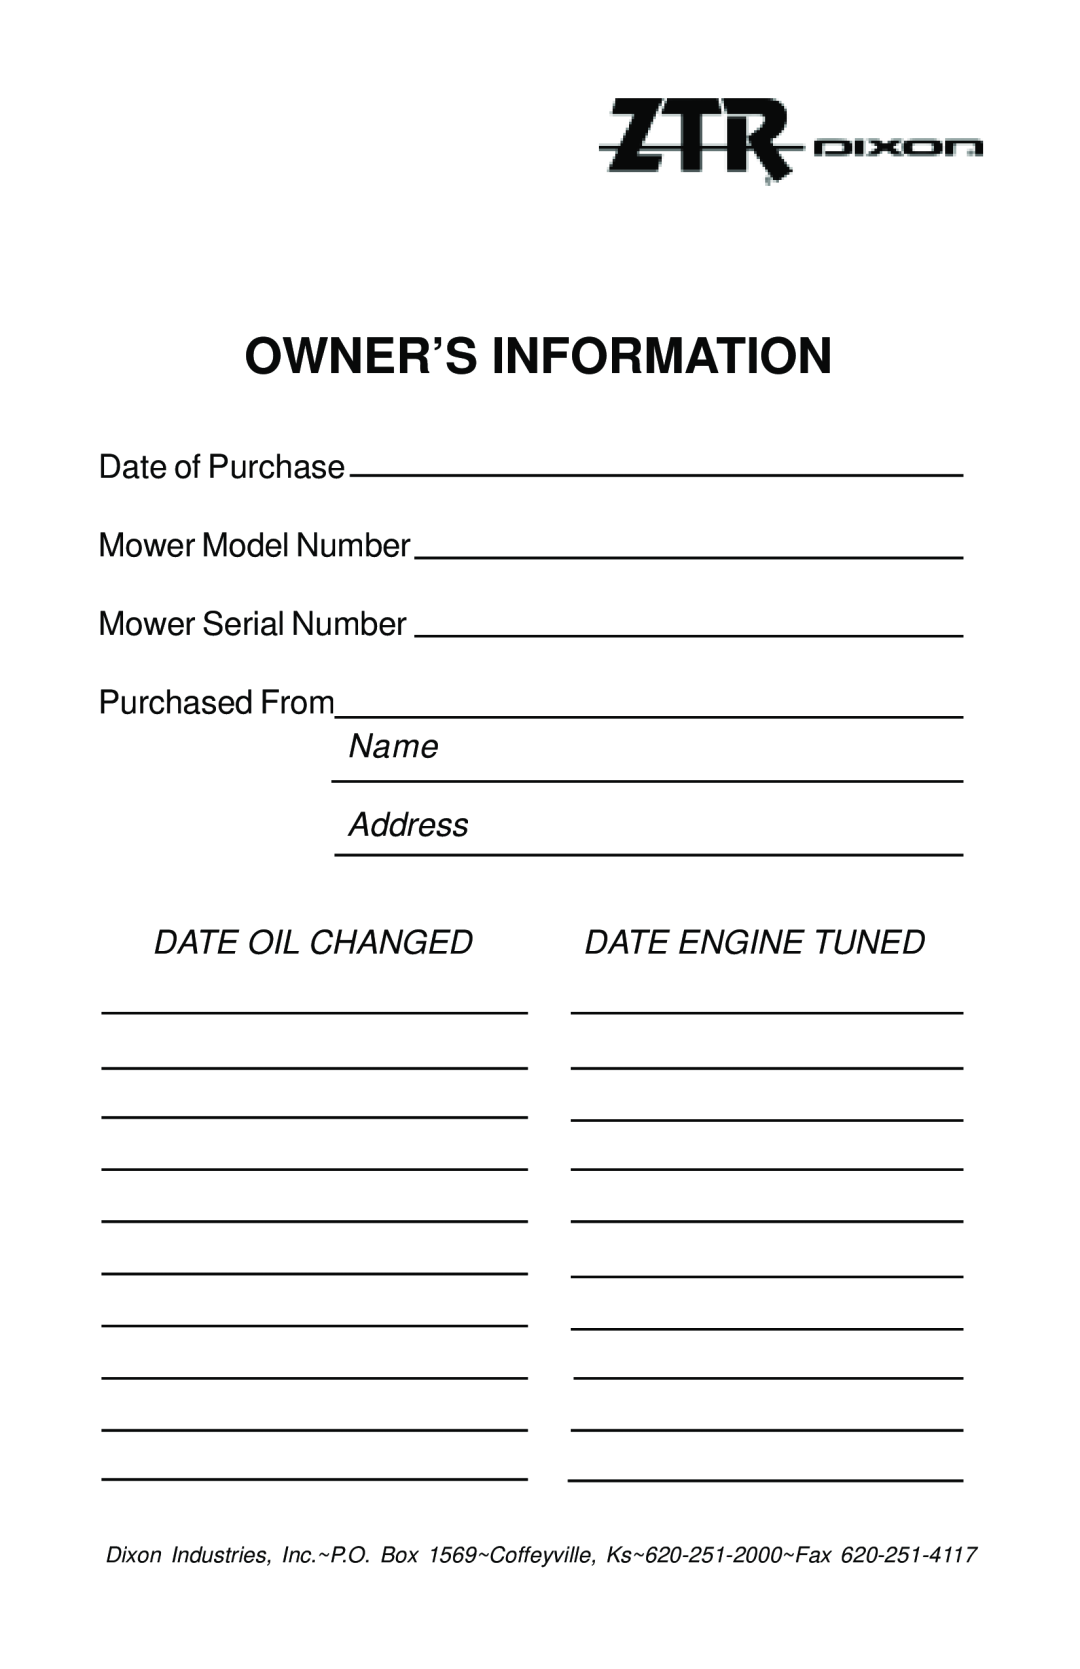 Dixon 12881-1104 manual Owner’S Information, Date of Purchase Mower Model Number Mower Serial Number, Purchased From 